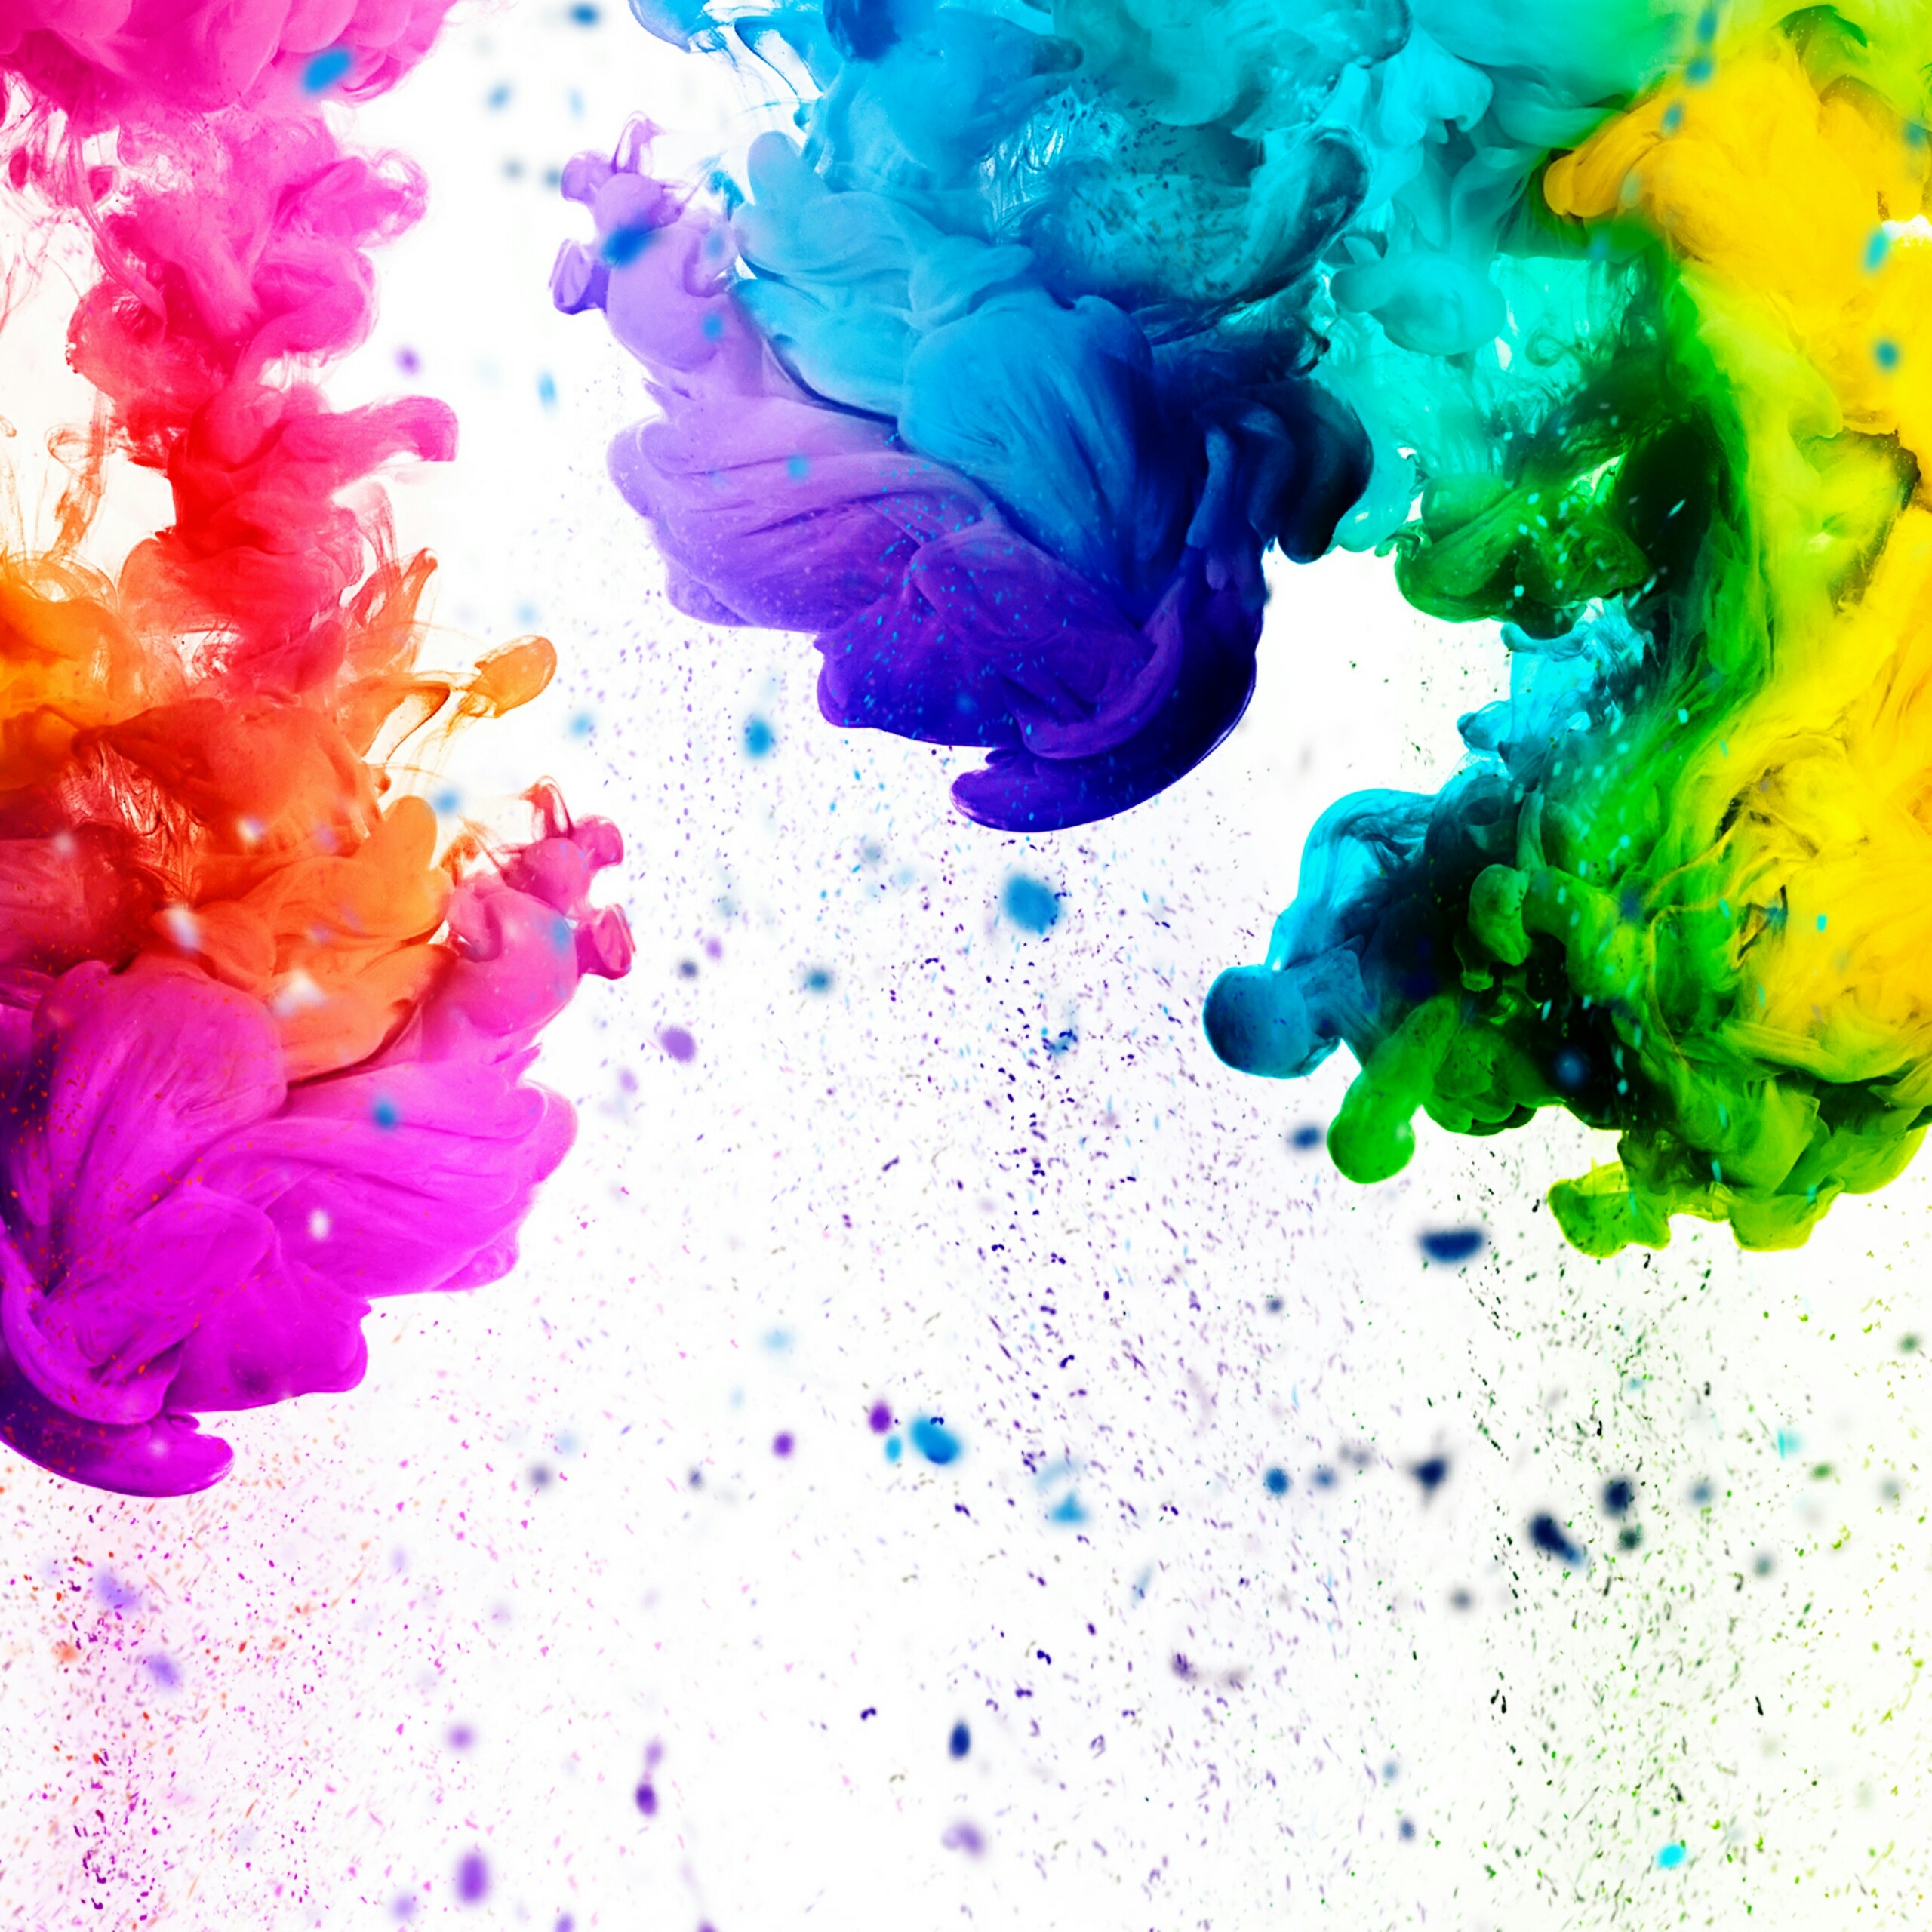 A Colorful Splash Abstract QHD Wallpaper